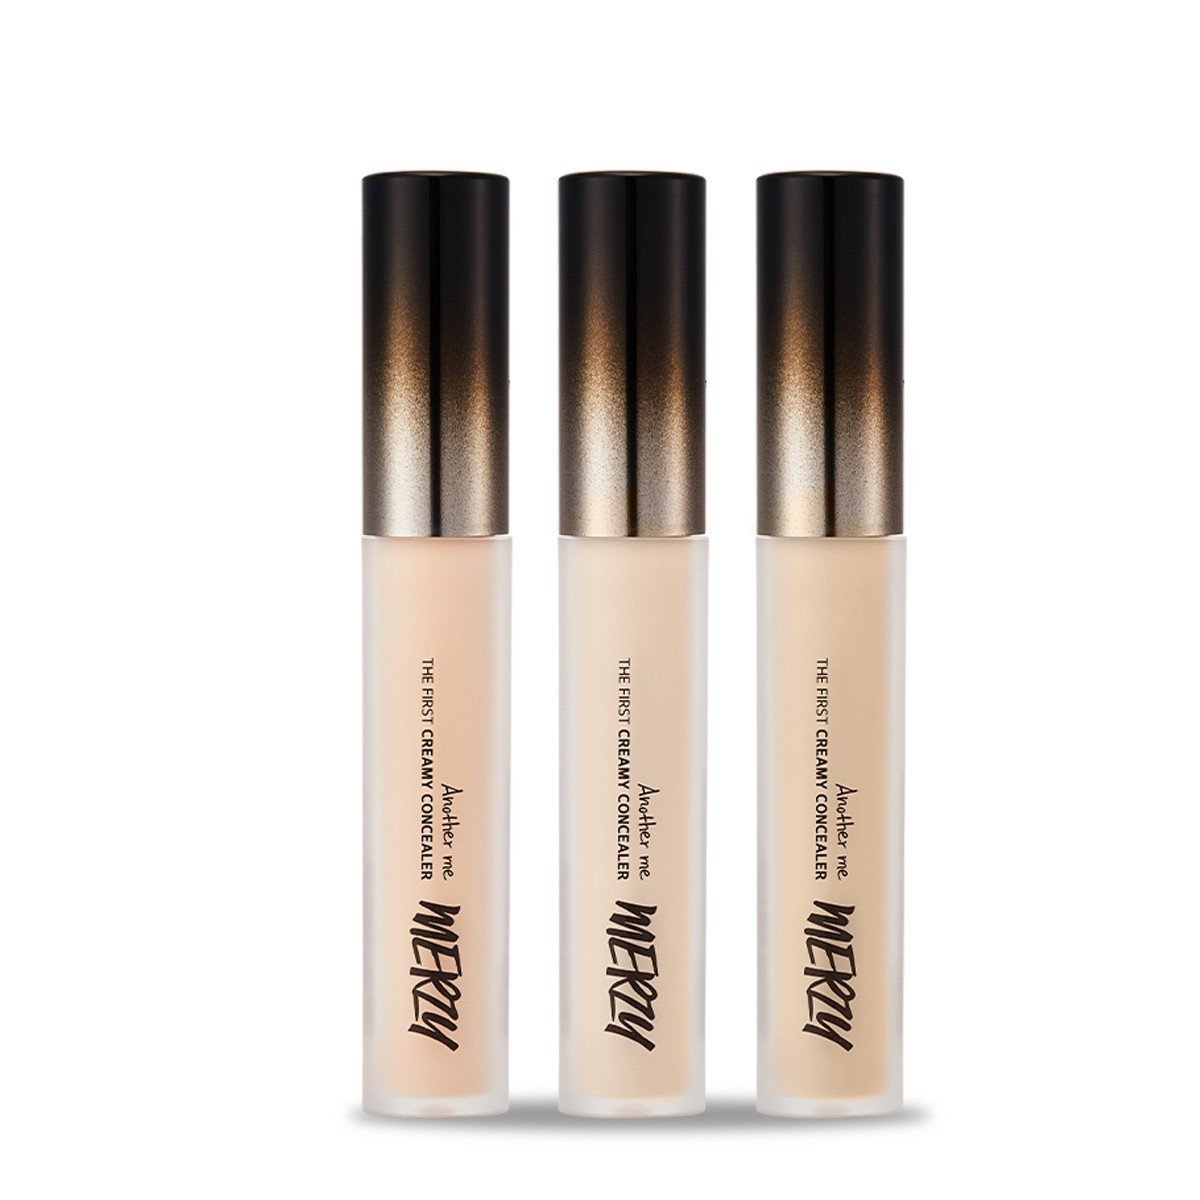 MERZY THE FIRST CREAMY CONCEALER 5.6g (3 Colors) - JOSEPH BEAUTY